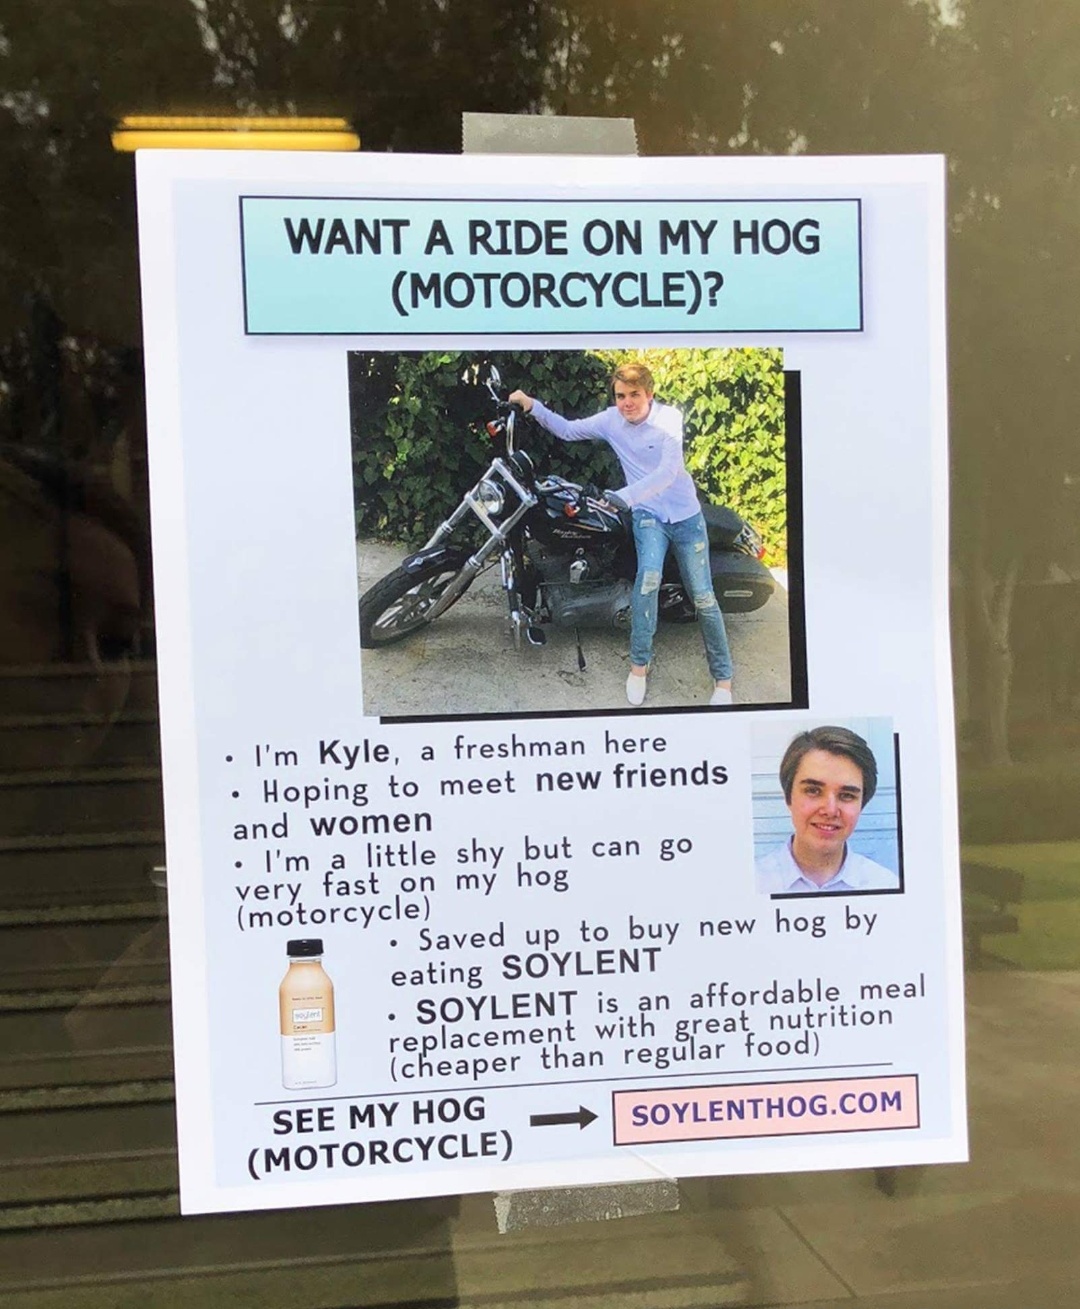 signage - Want A Ride On My Hog Motorcycle? I'm Kyle, a freshman here Hoping to meet new friends and women I'm a little shy but can go very fast on my hog motorcycle Saved up to buy new hog by eating Soylent . Soylent is an affordable meal replacement wit